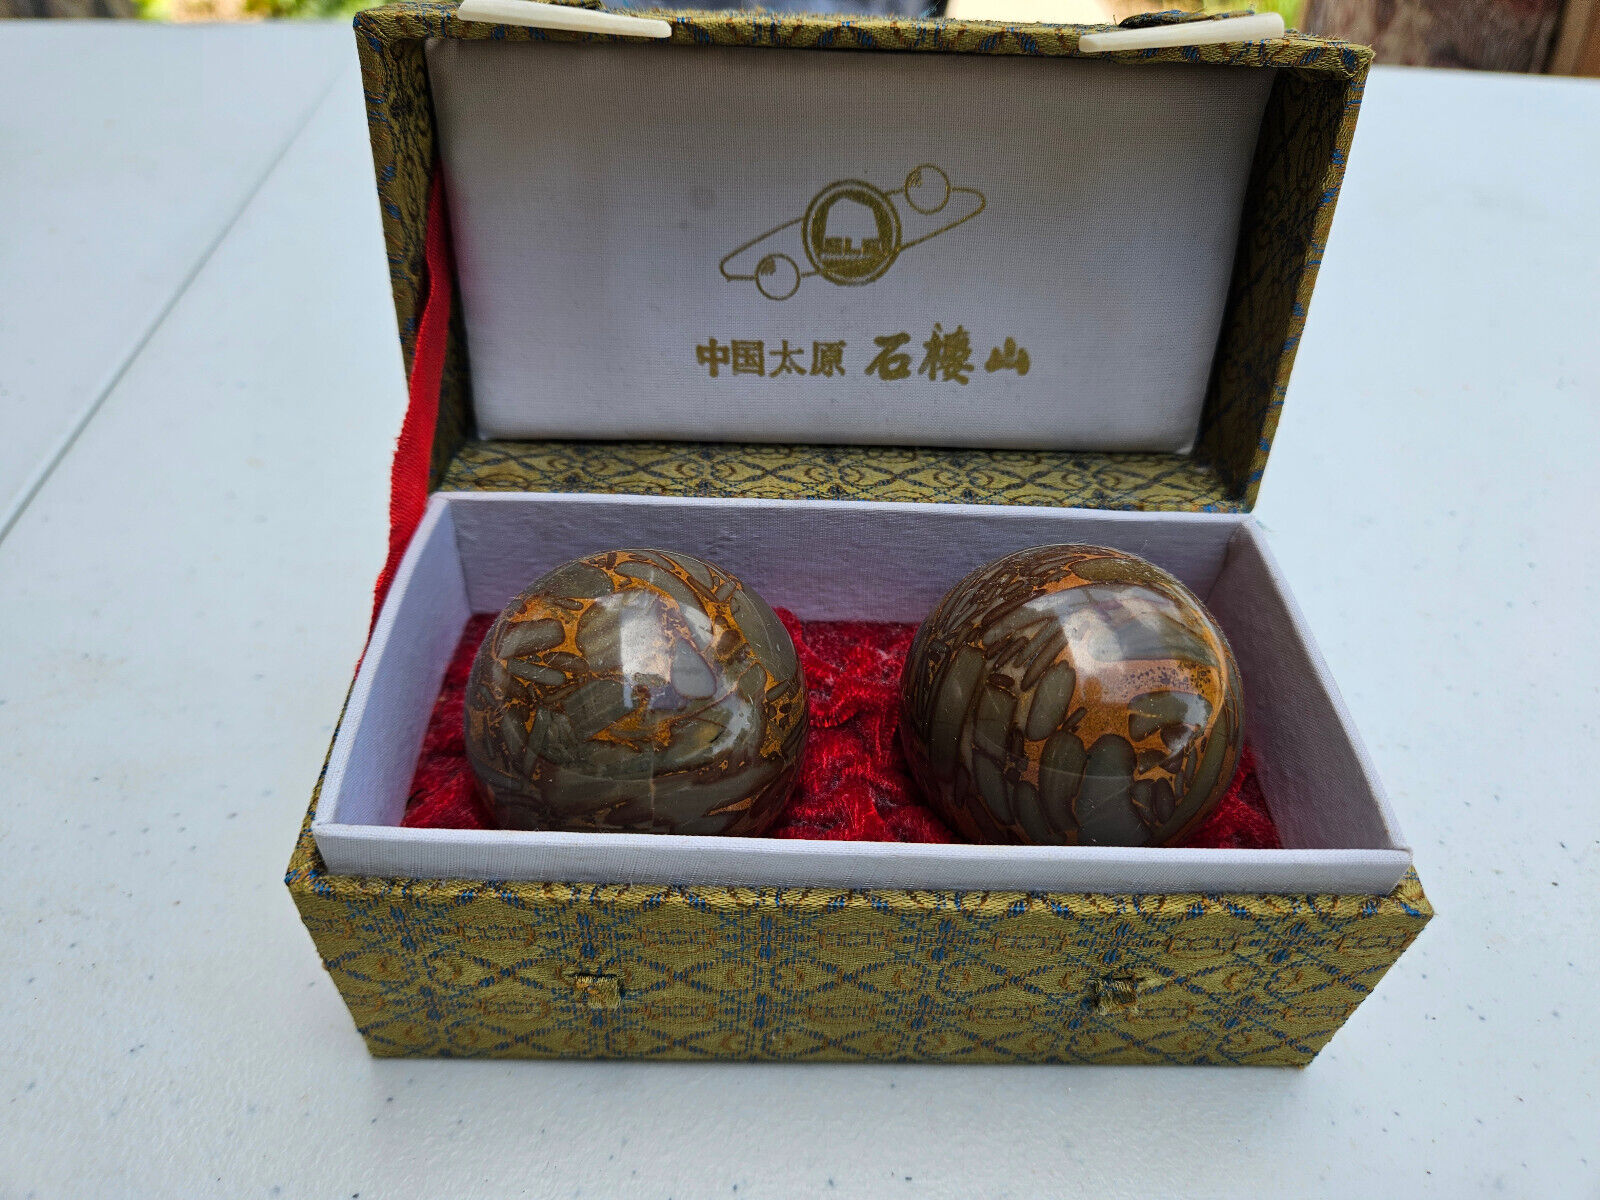 Chinese Stress Baoding Balls - Relaxation Therapy